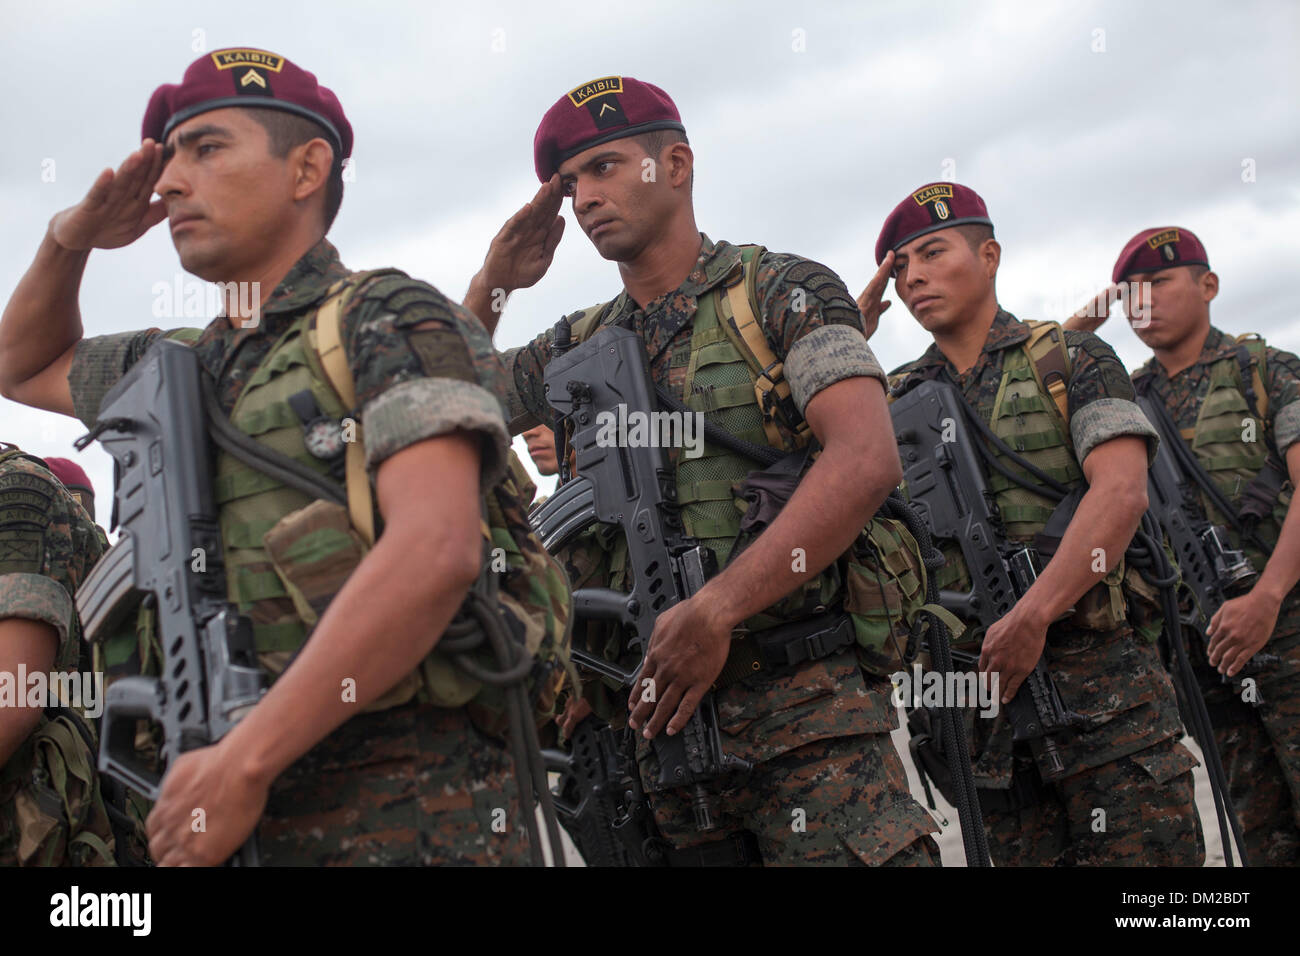 Guatemala City, Guatemala. 10th Dec, 2013. Soldiers of the Special Force 'Kaibil' of Guatemalan Army participate in a parade to commemorate the 92nd anniversary of the Guatemalan Air Force, in Guatemala City, capital of Guatemala, on Dec. 10, 2013. Credit:  Luis Echeverria/Xinhua/Alamy Live News Stock Photo